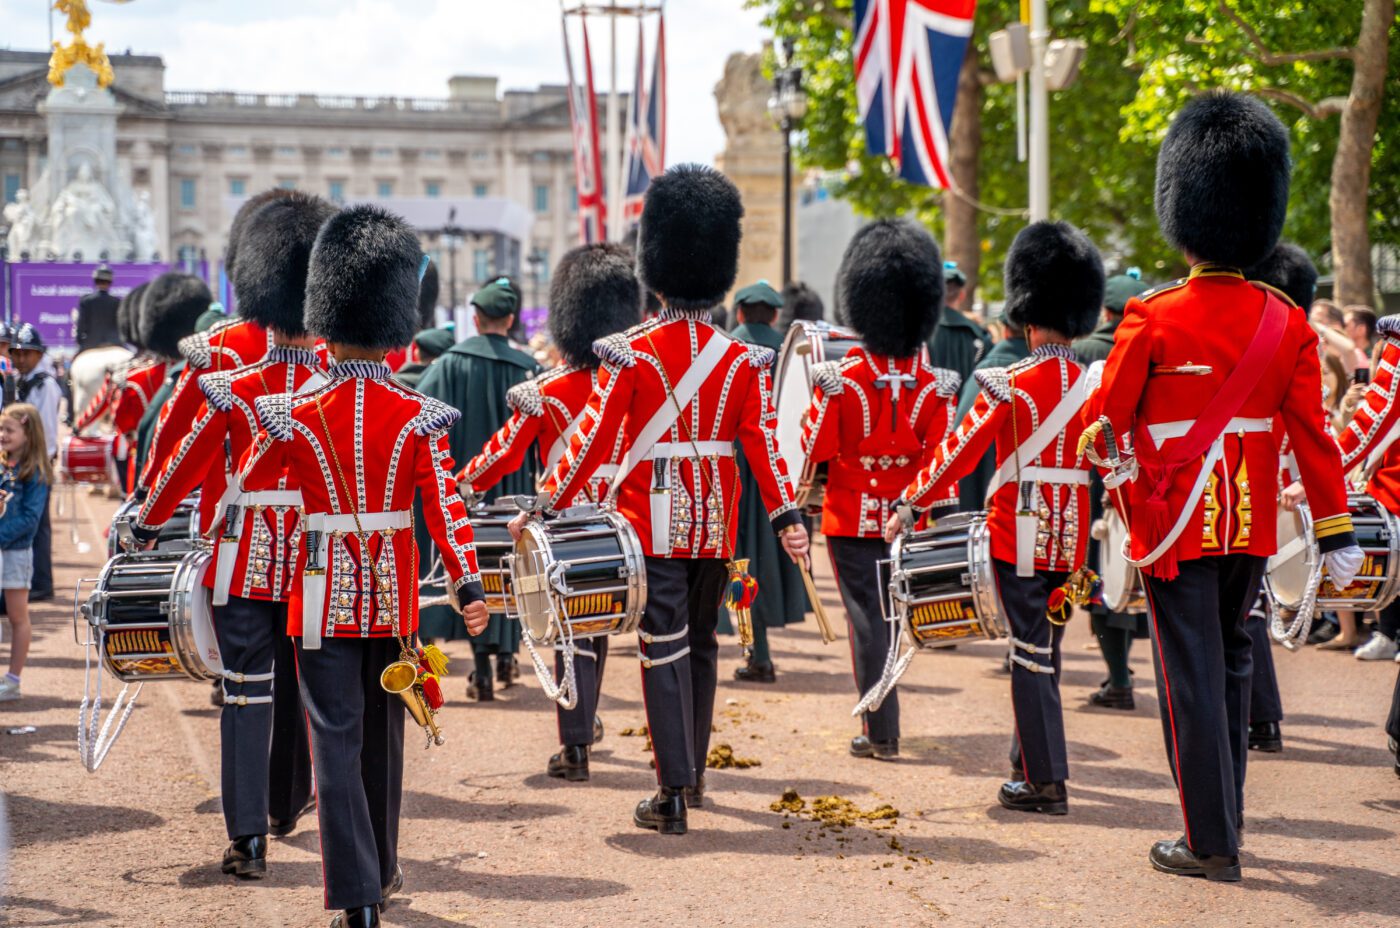 Queens Guards at the Trooping of the Colour at Buckingham Palace, London